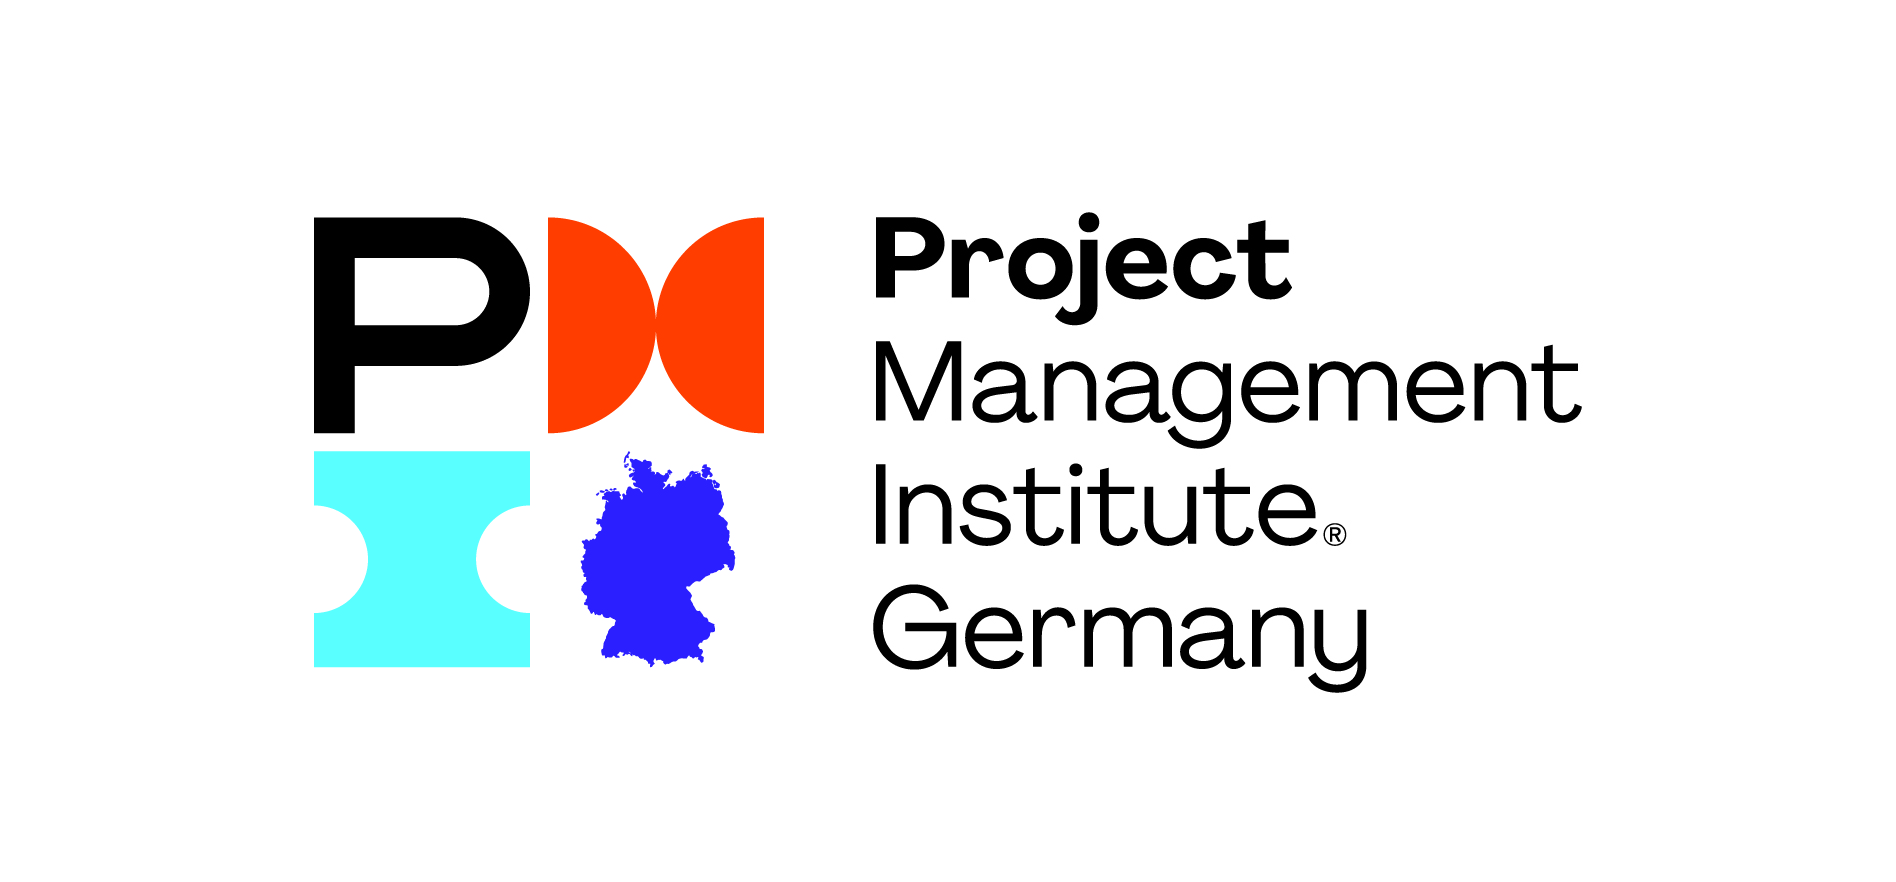 Project Management Institute (PMI) Germany